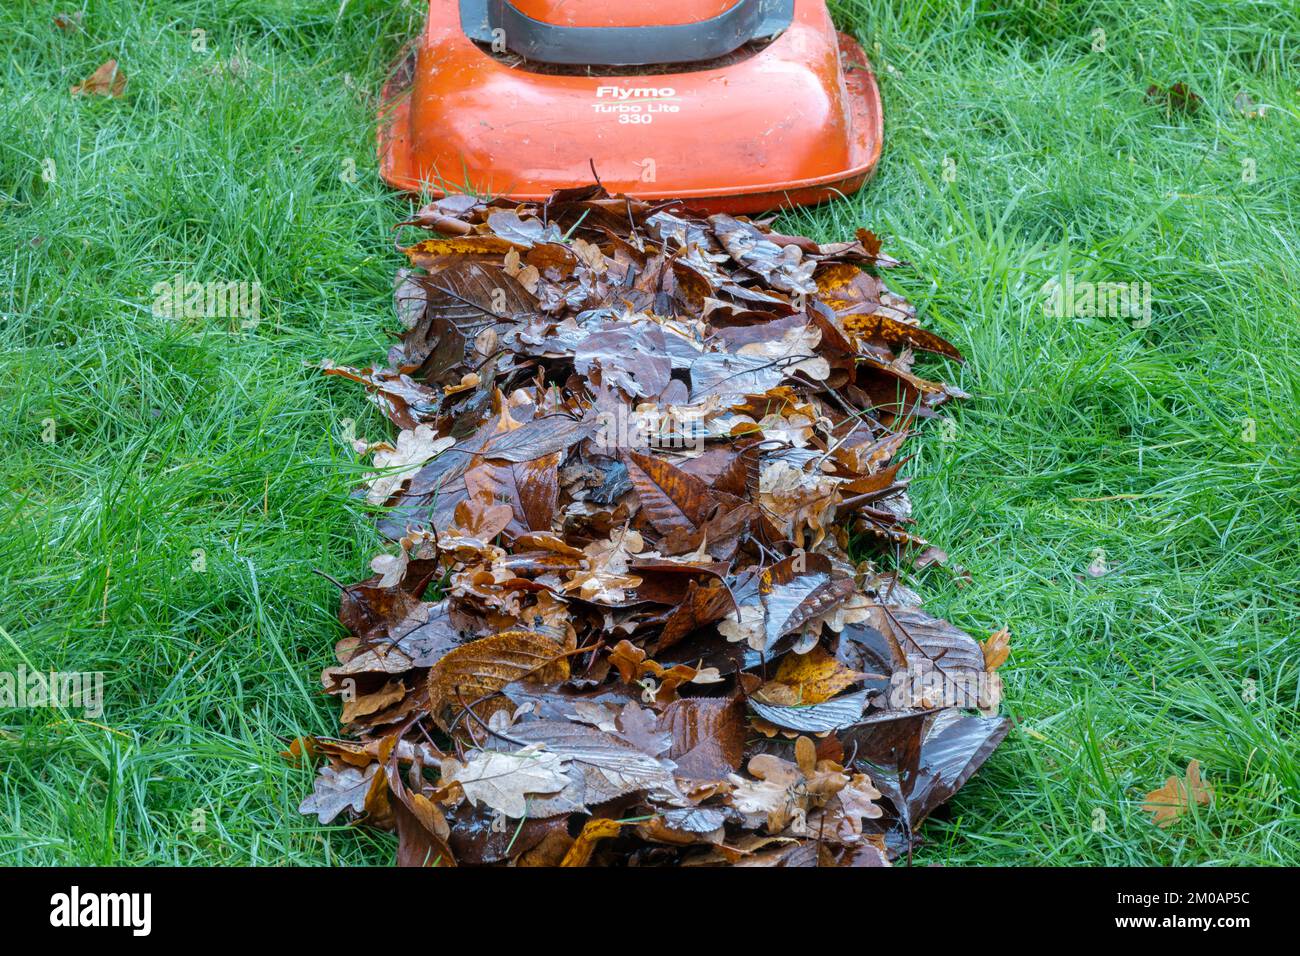 Mowing a line of raked autumn leaves to make leaf mulch for the garden during November, England, UK Stock Photo